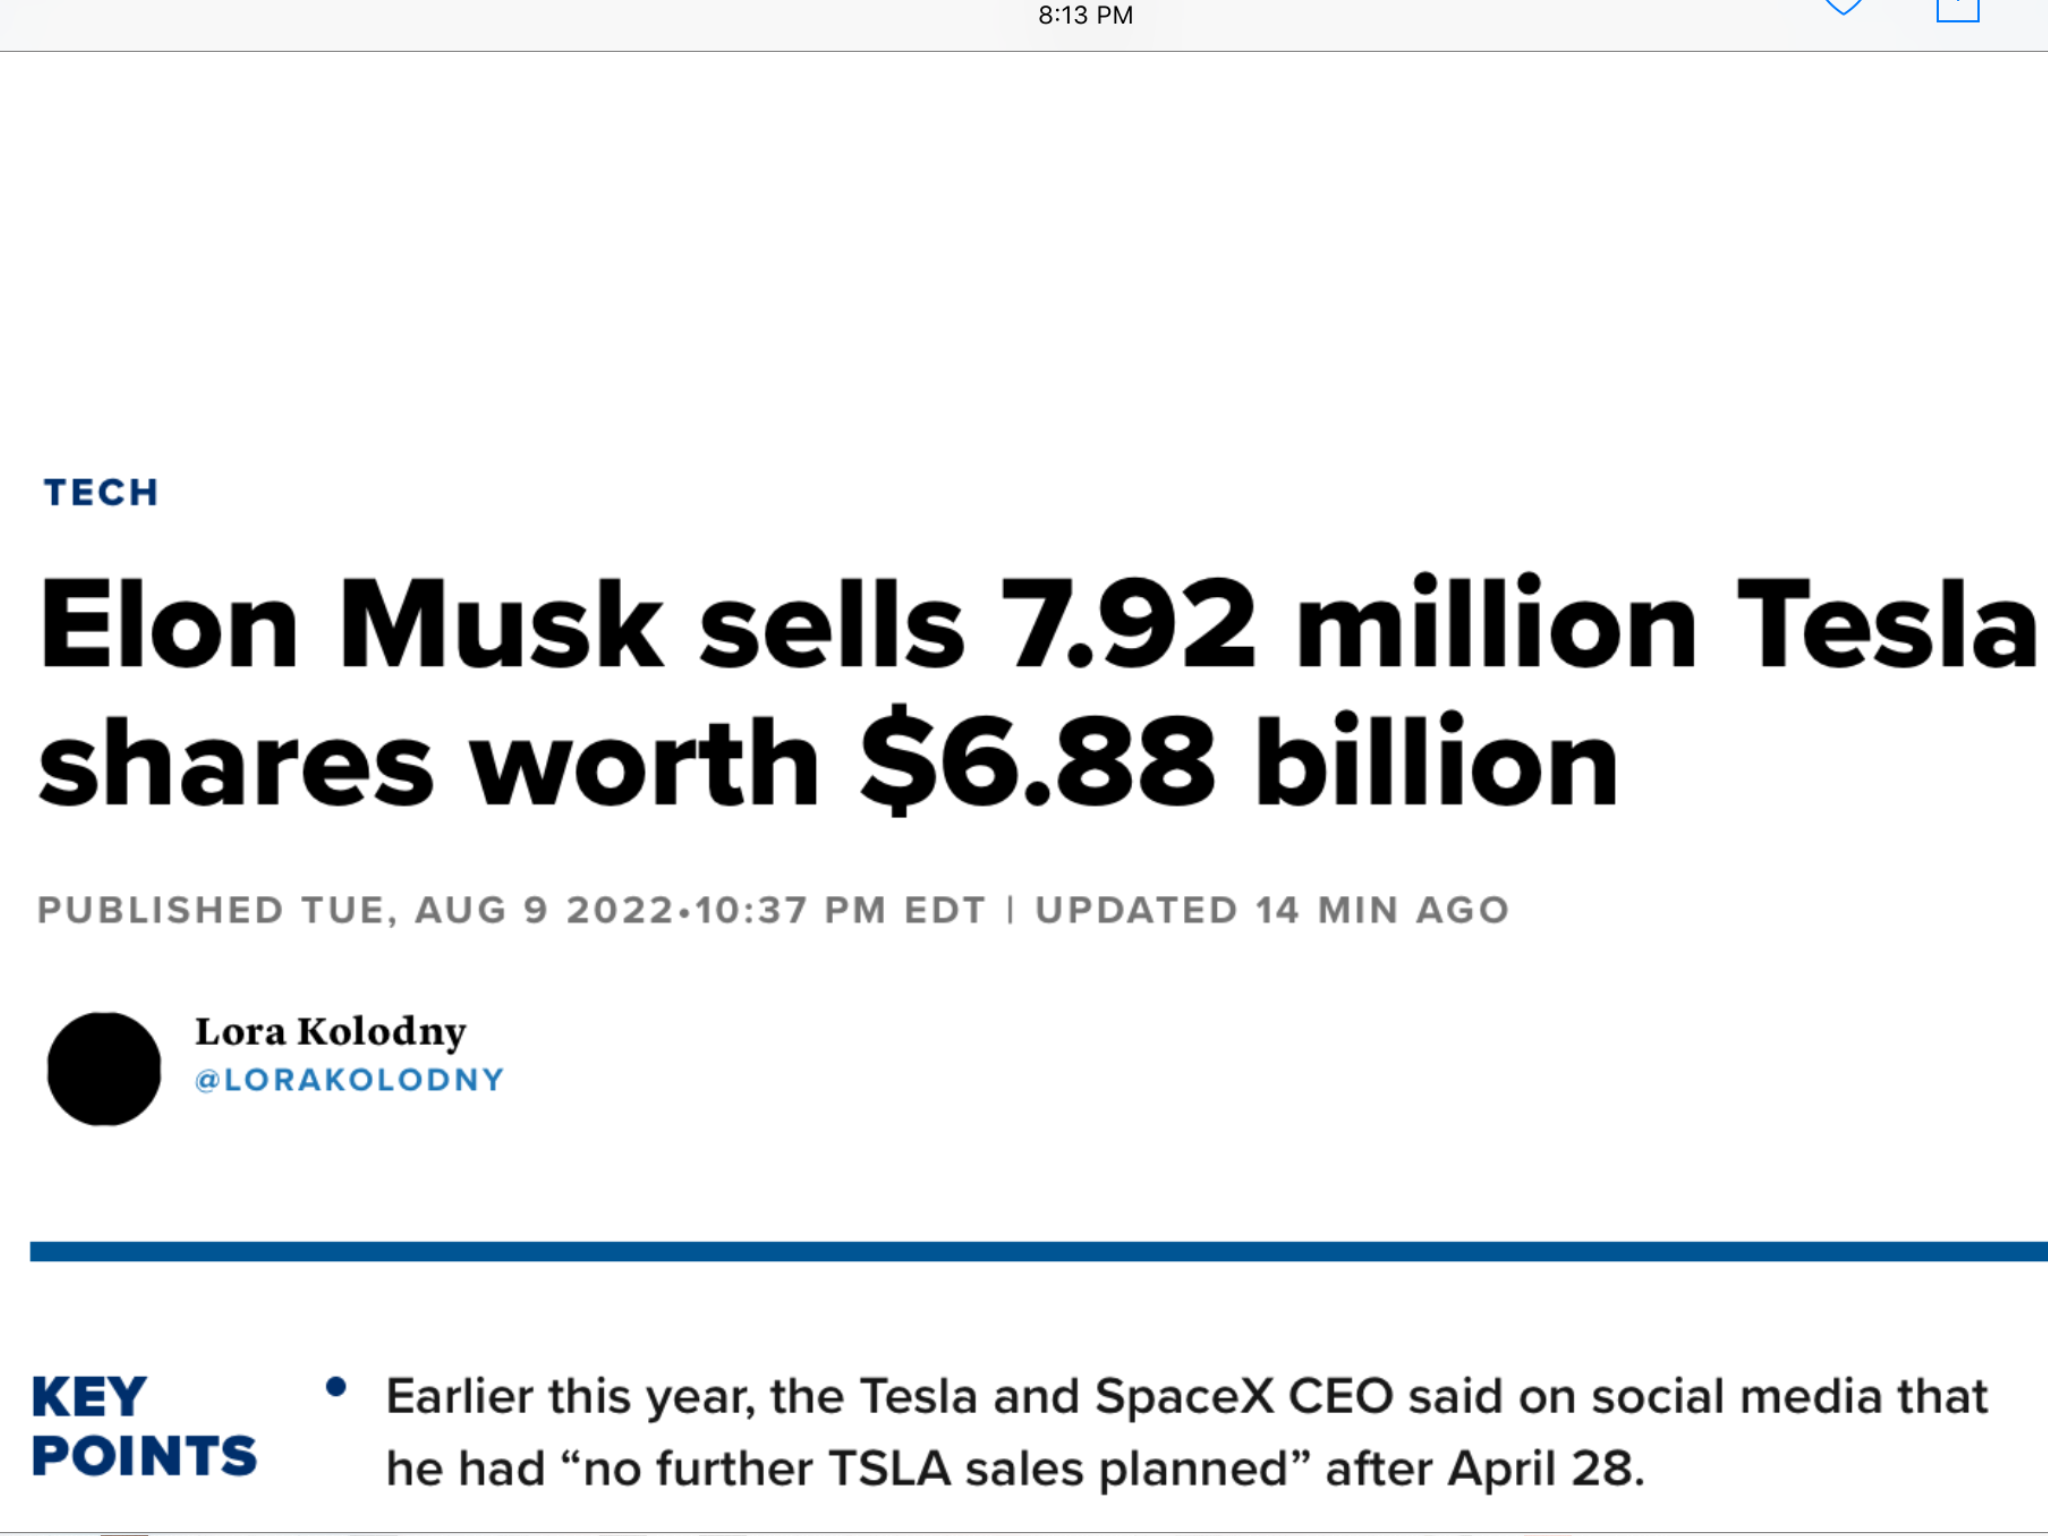 THAT IS A BOATLOAD OF STOCK ELON RECENTLY SOLD